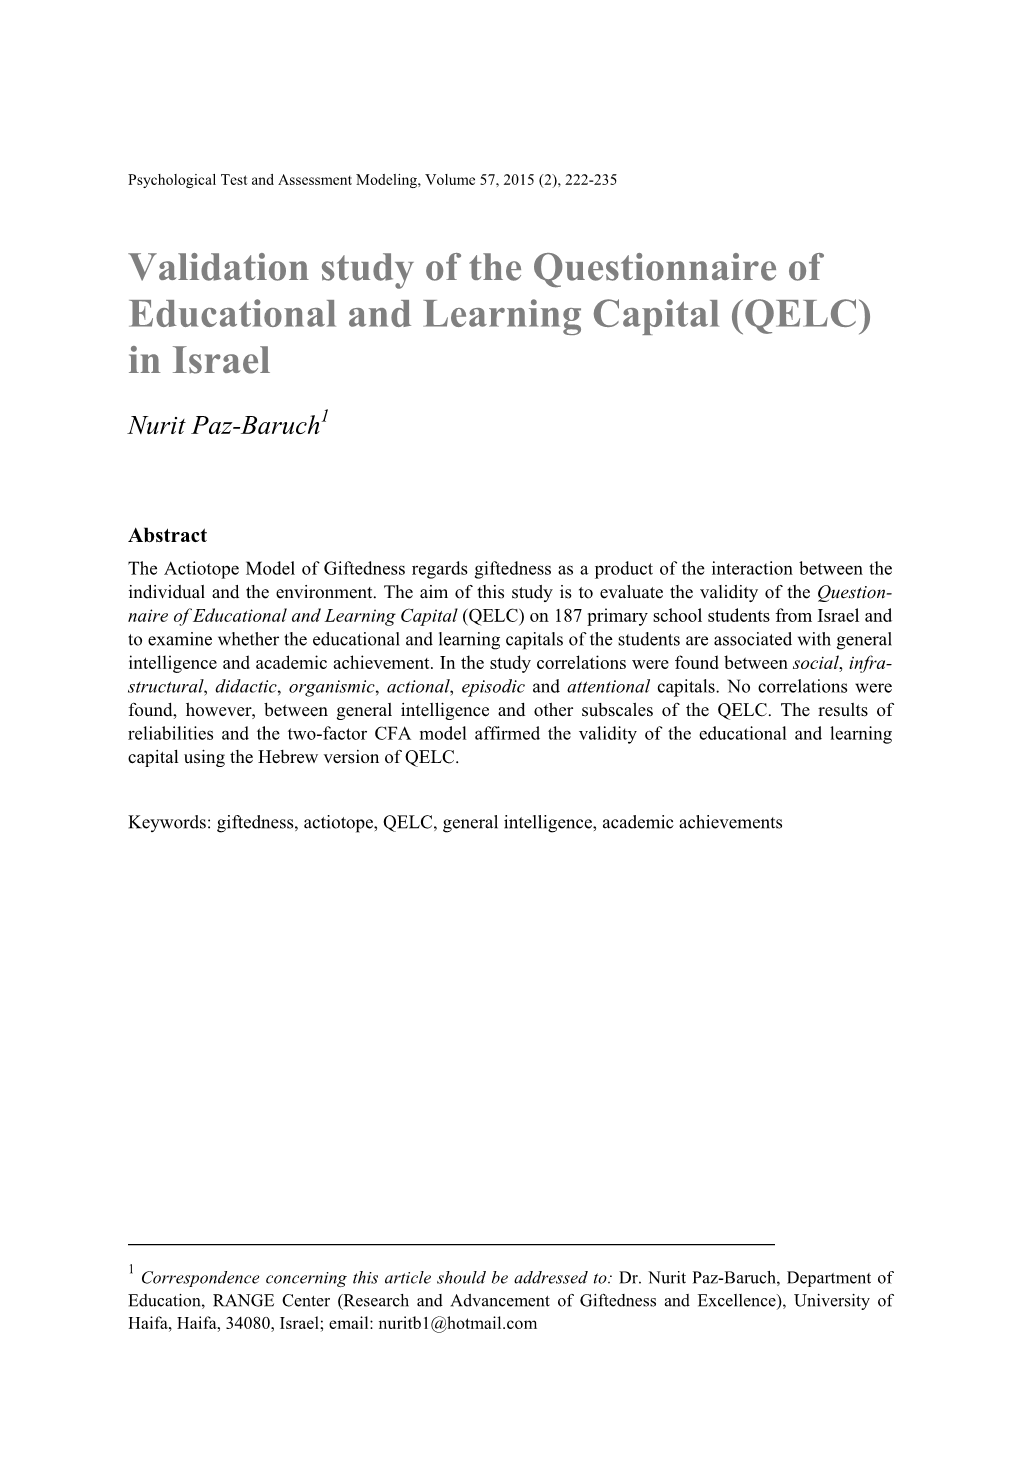 Validation Study of the Questionnaire of Educational and Learning Capital (QELC) in Israel